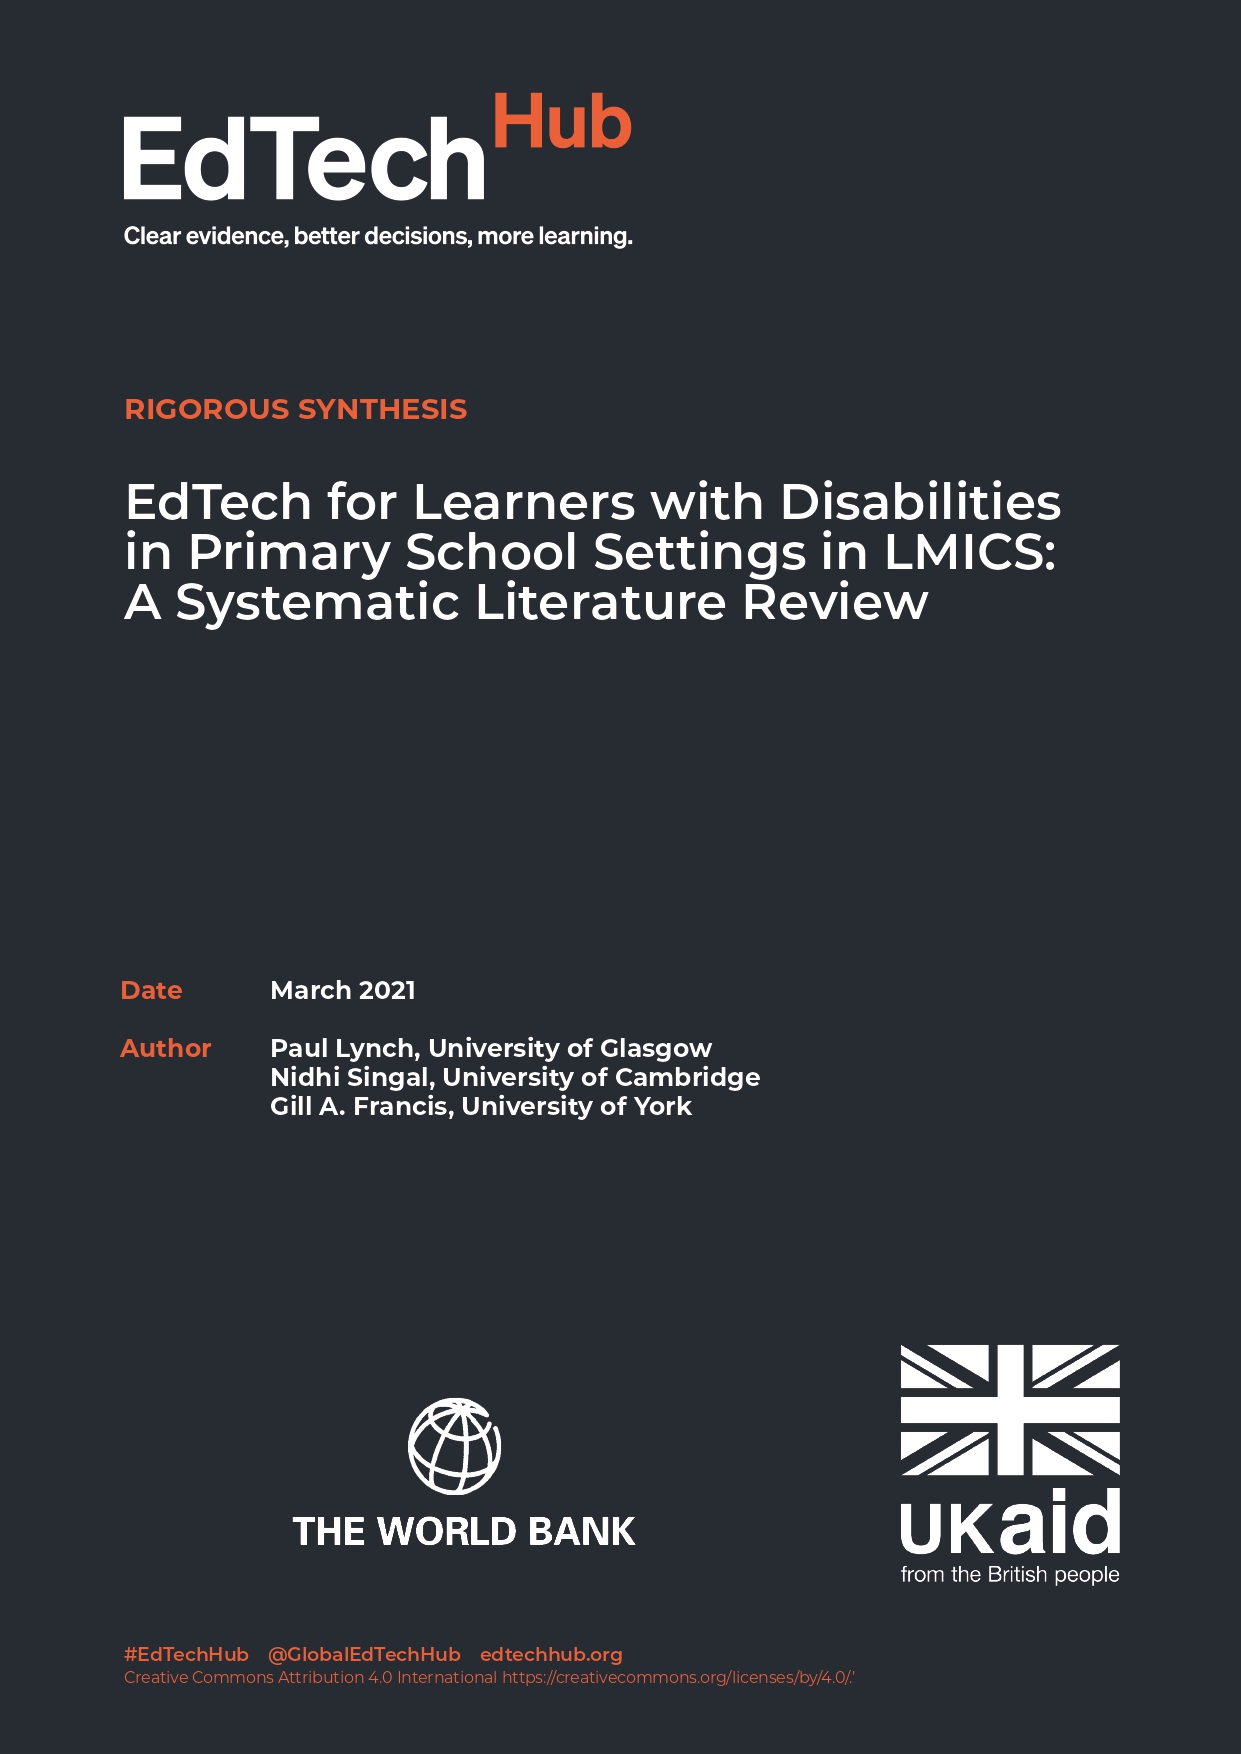 EdTech for Learners with Disabilities in Primary School Settings in LMICS: A Systematic Literature Review